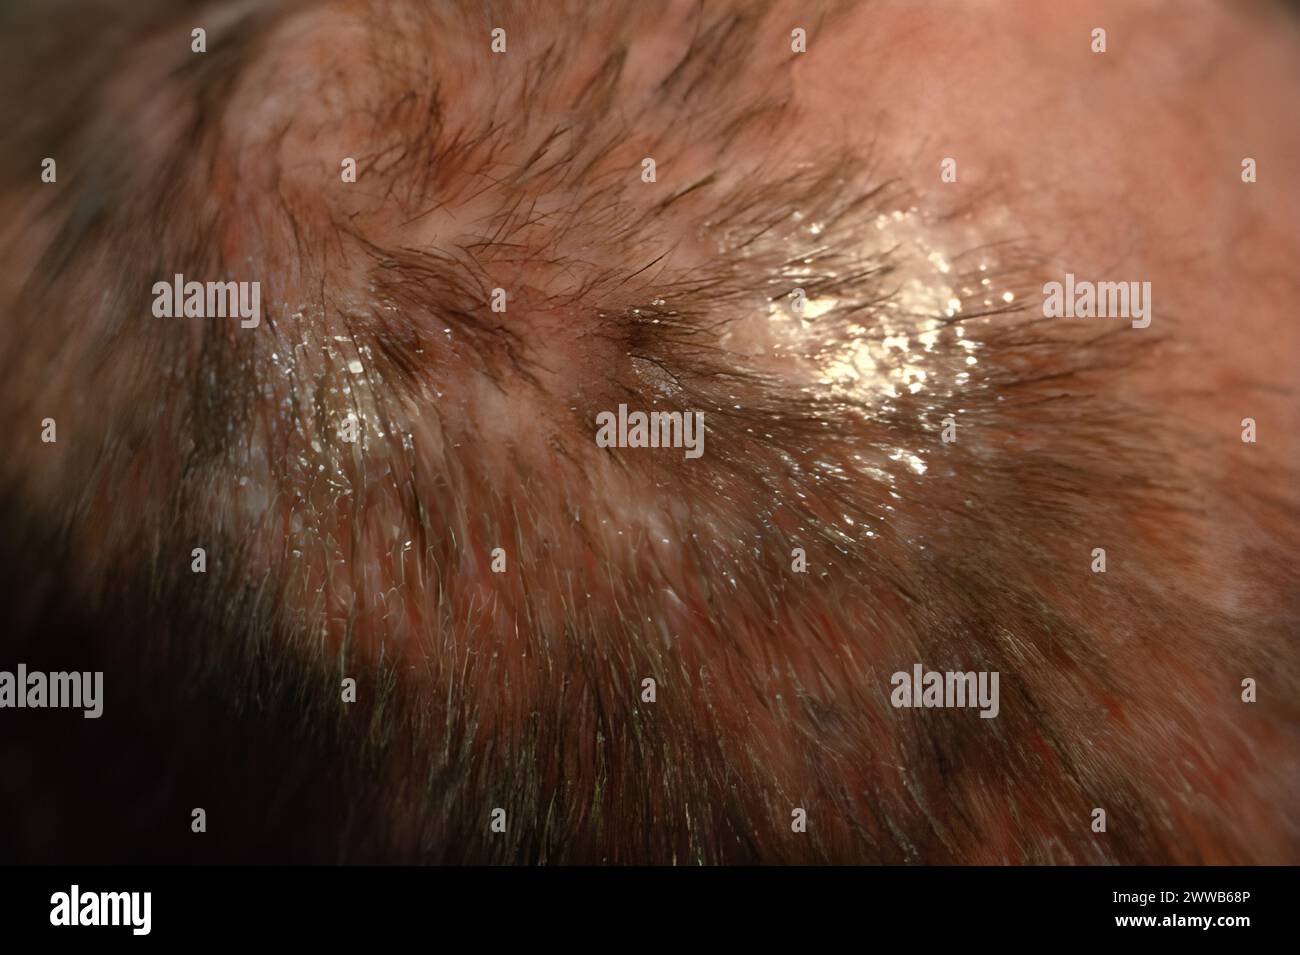 The favus on this patient’s scalp is due to the fungus T. schoenleinii. Stock Photo